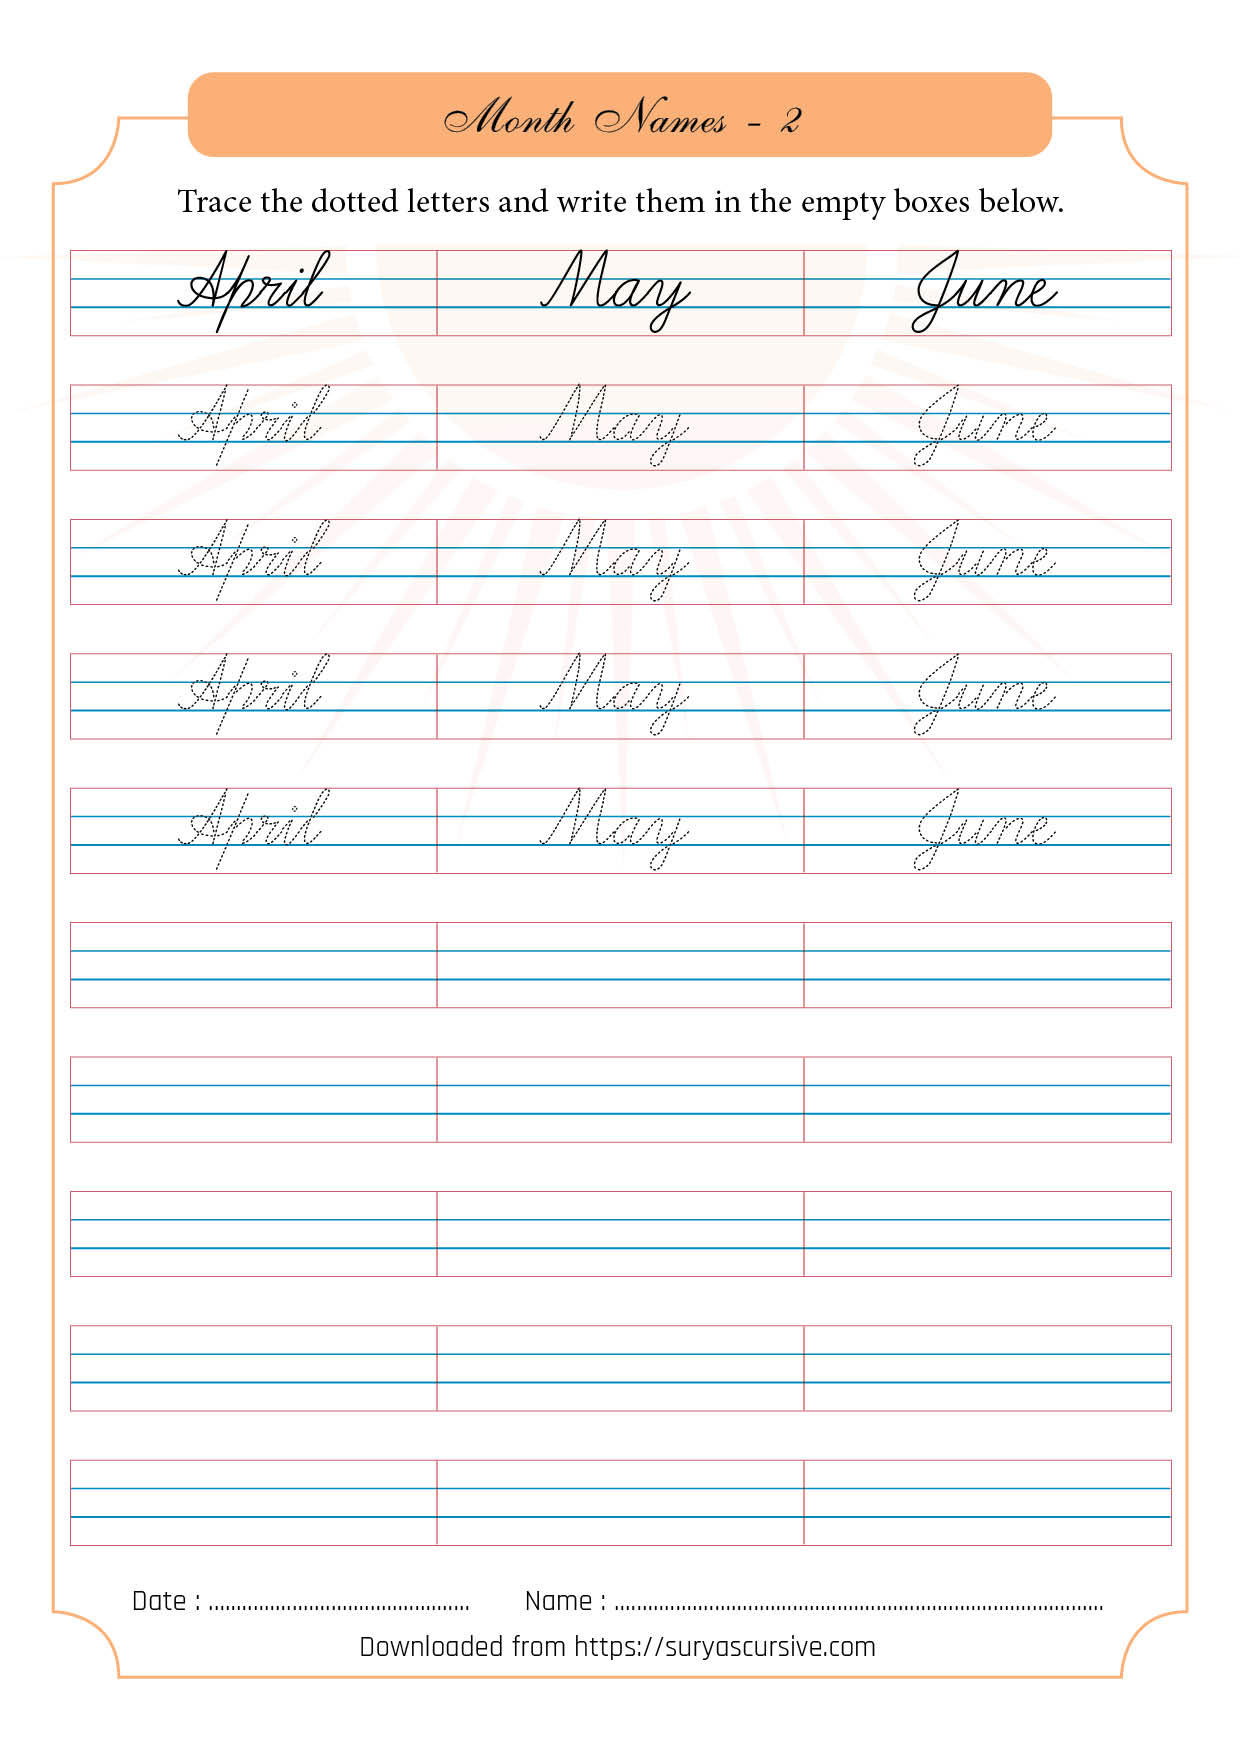 Months of the Year - Cursive Worksheets - SuryasCursive.com